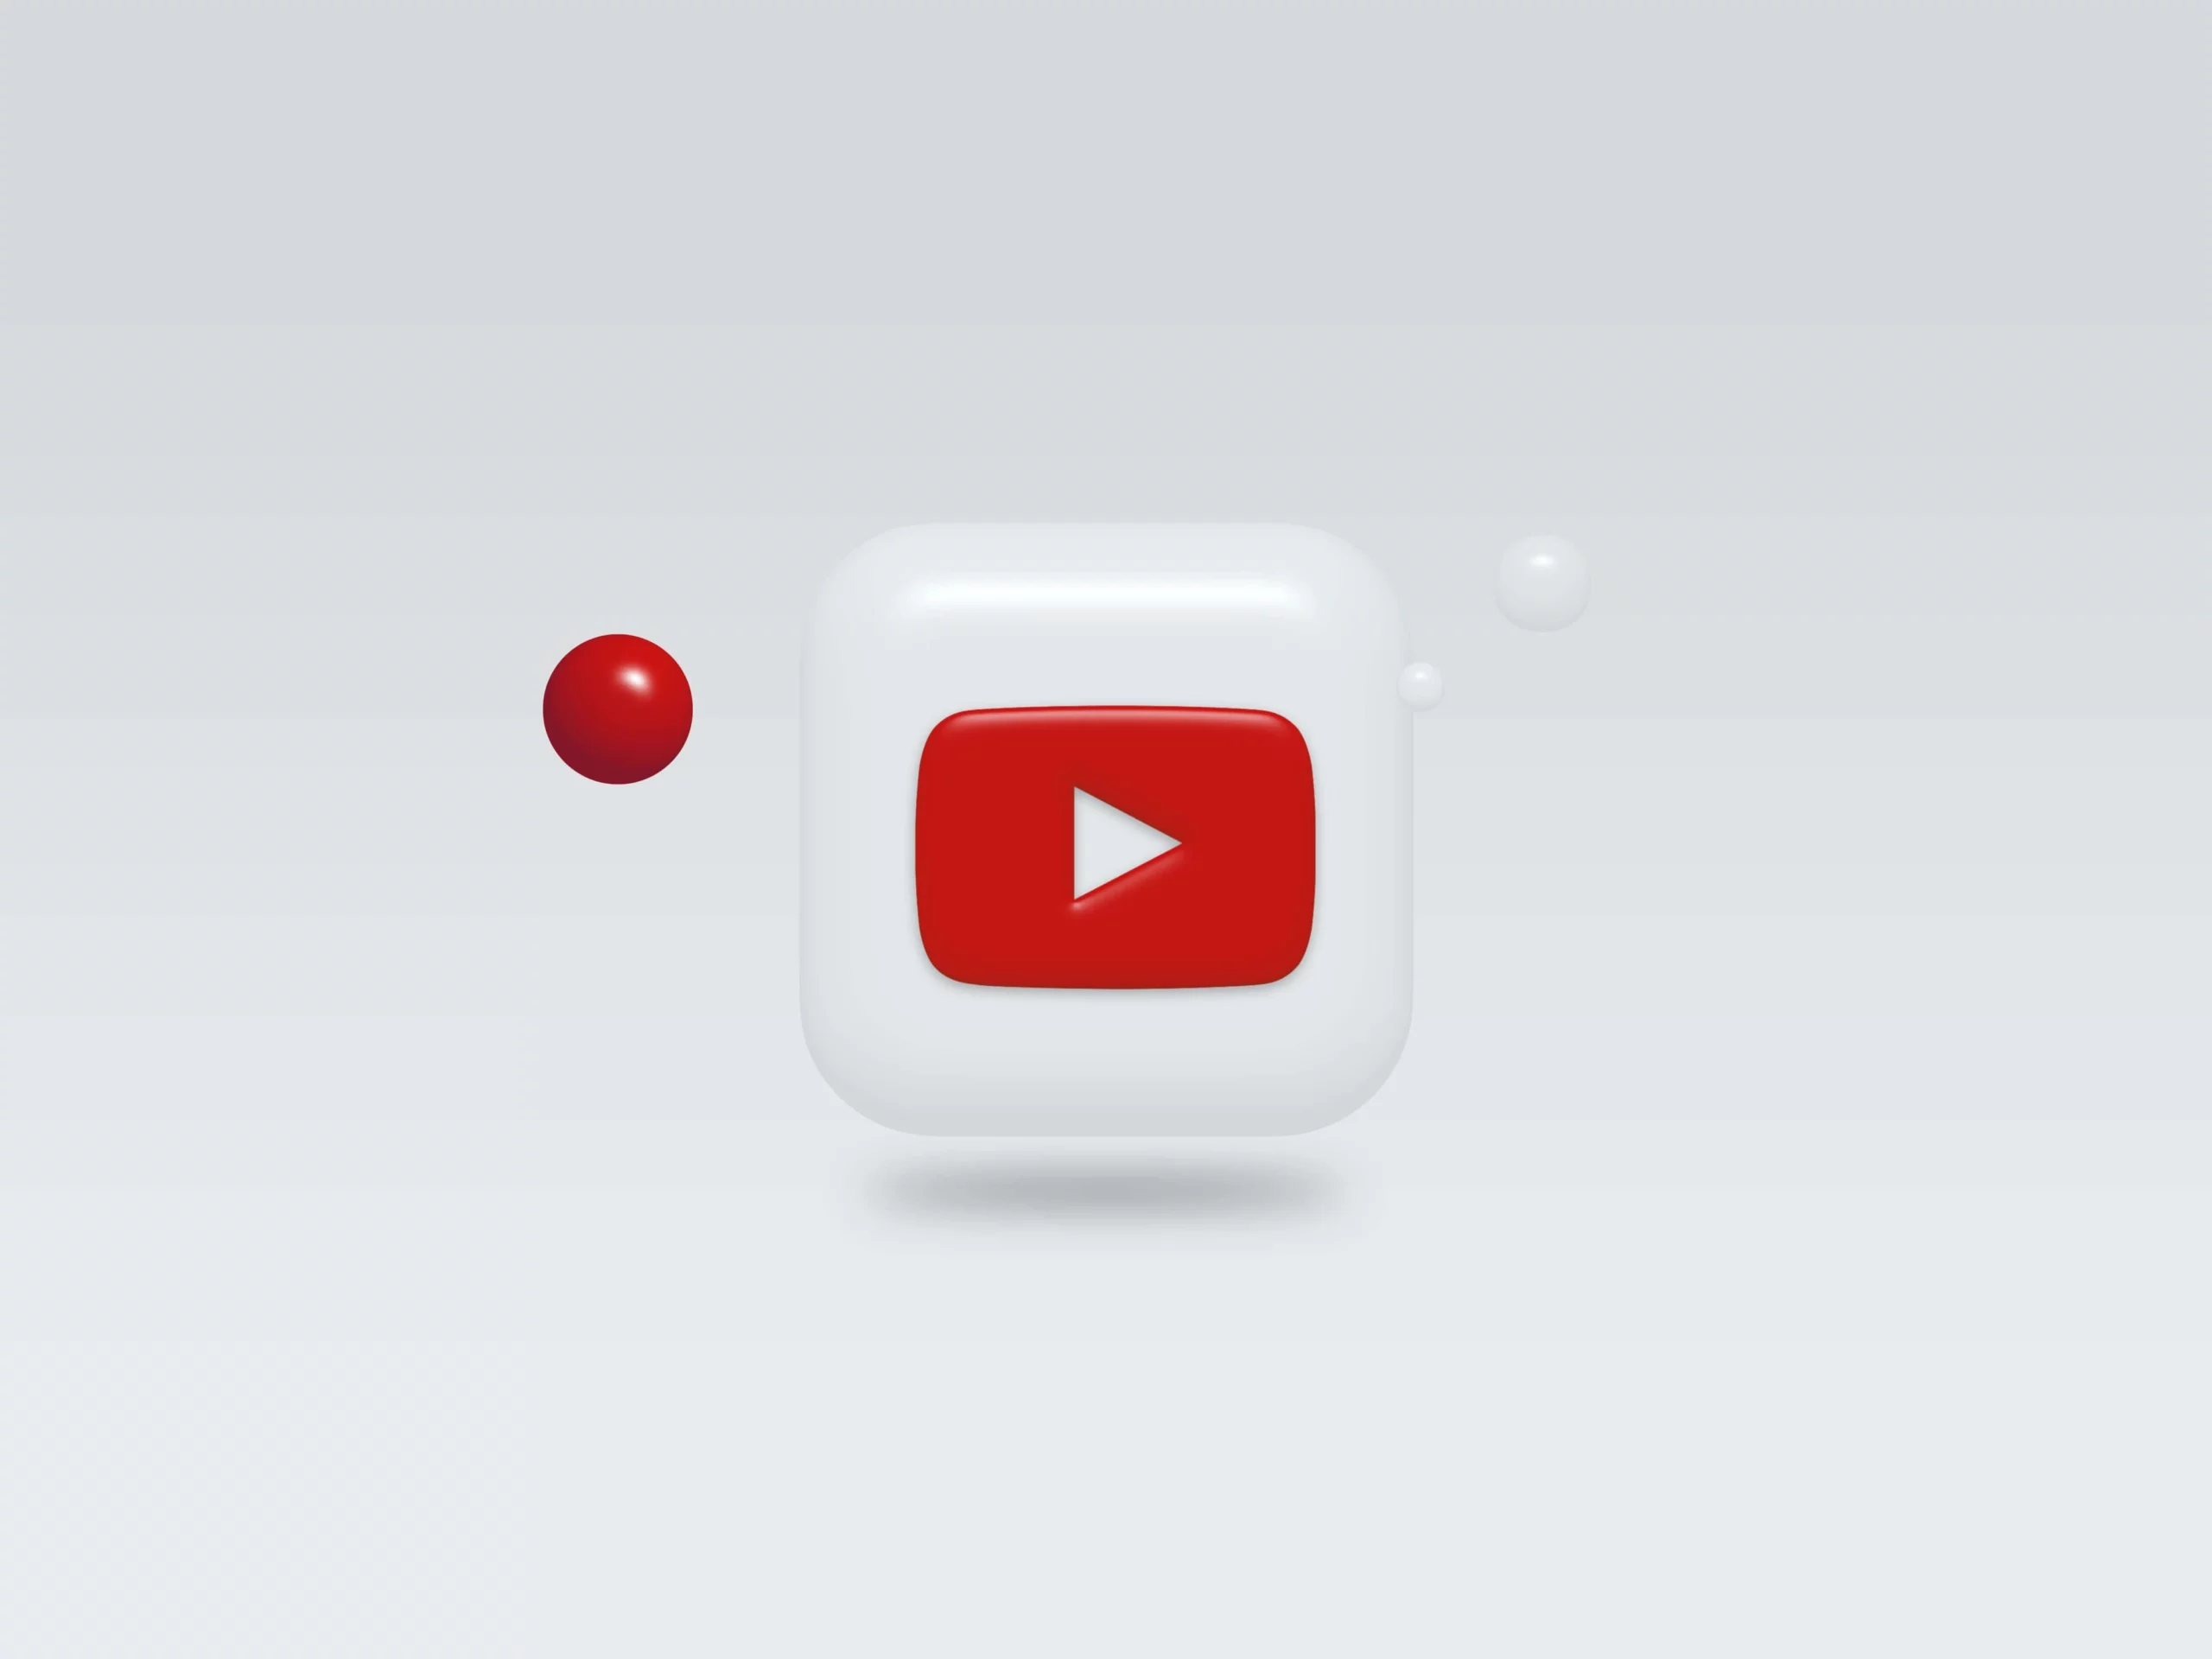 YouTube Watch Hours: Tips to Monetize YouTube Watch Hours and Grow Your Channel